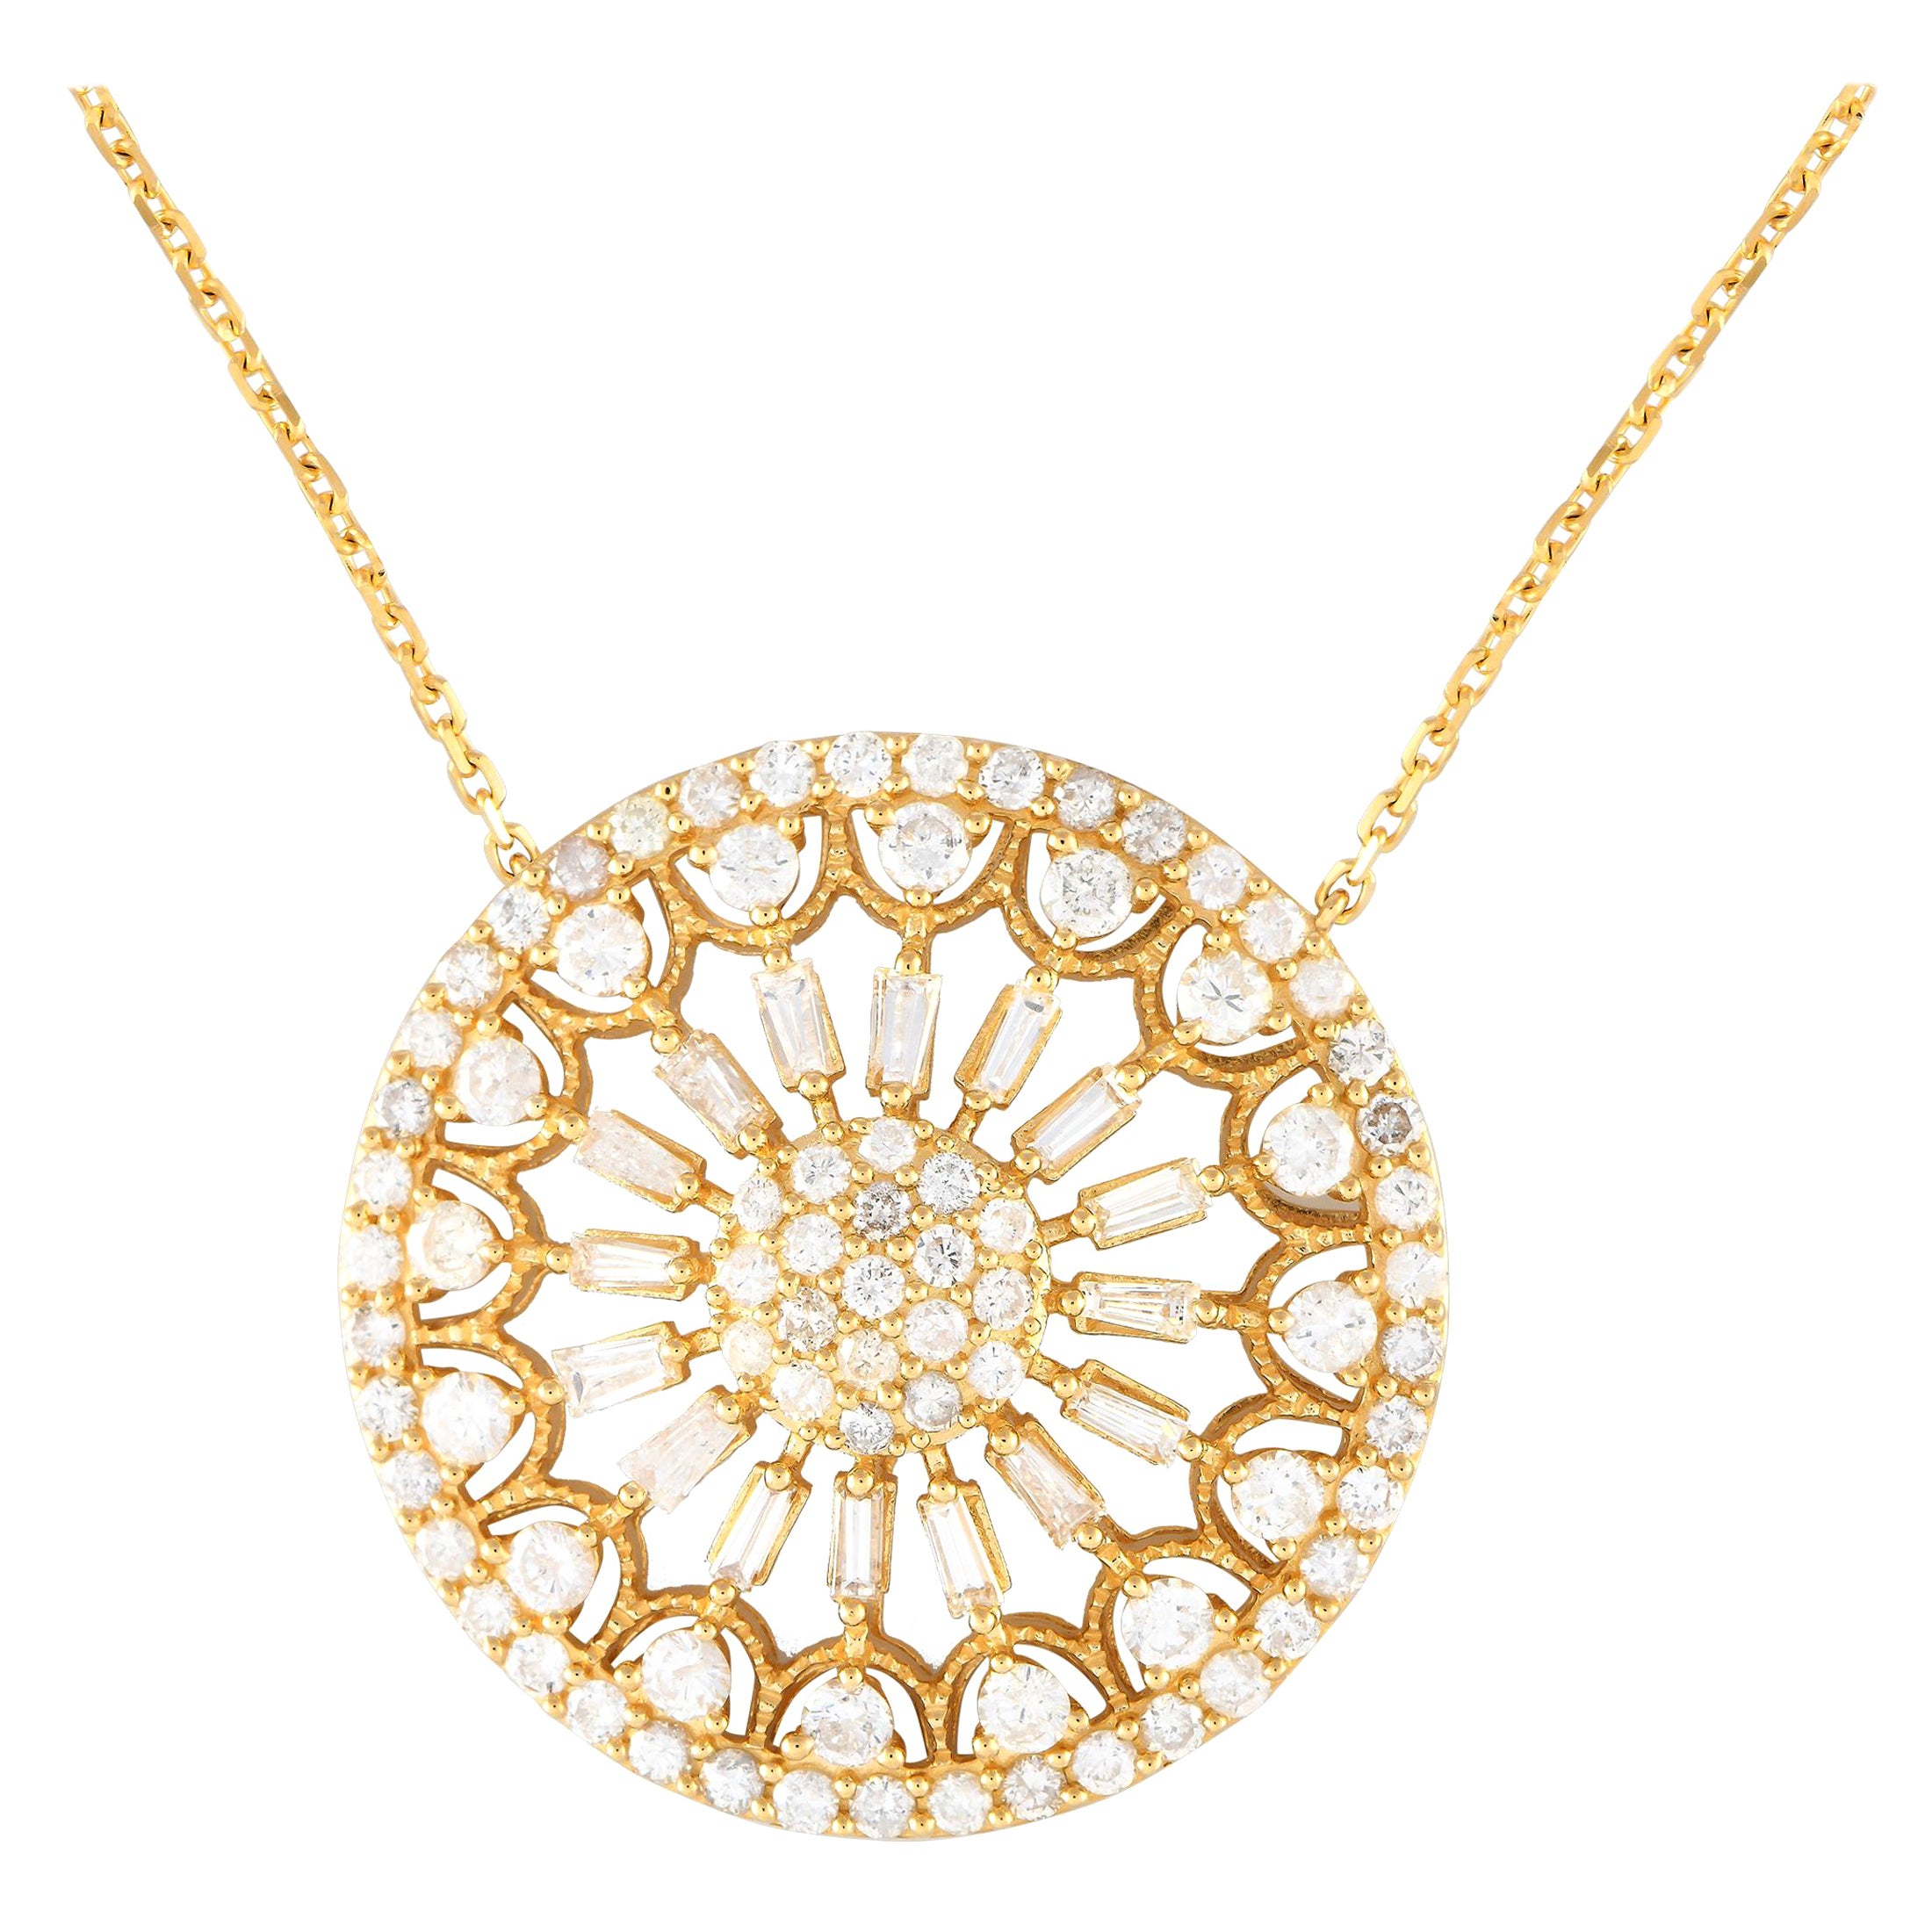 14K Yellow Gold 2.25ct Diamond Filigree Medallion Necklace PN15245-Y For Sale